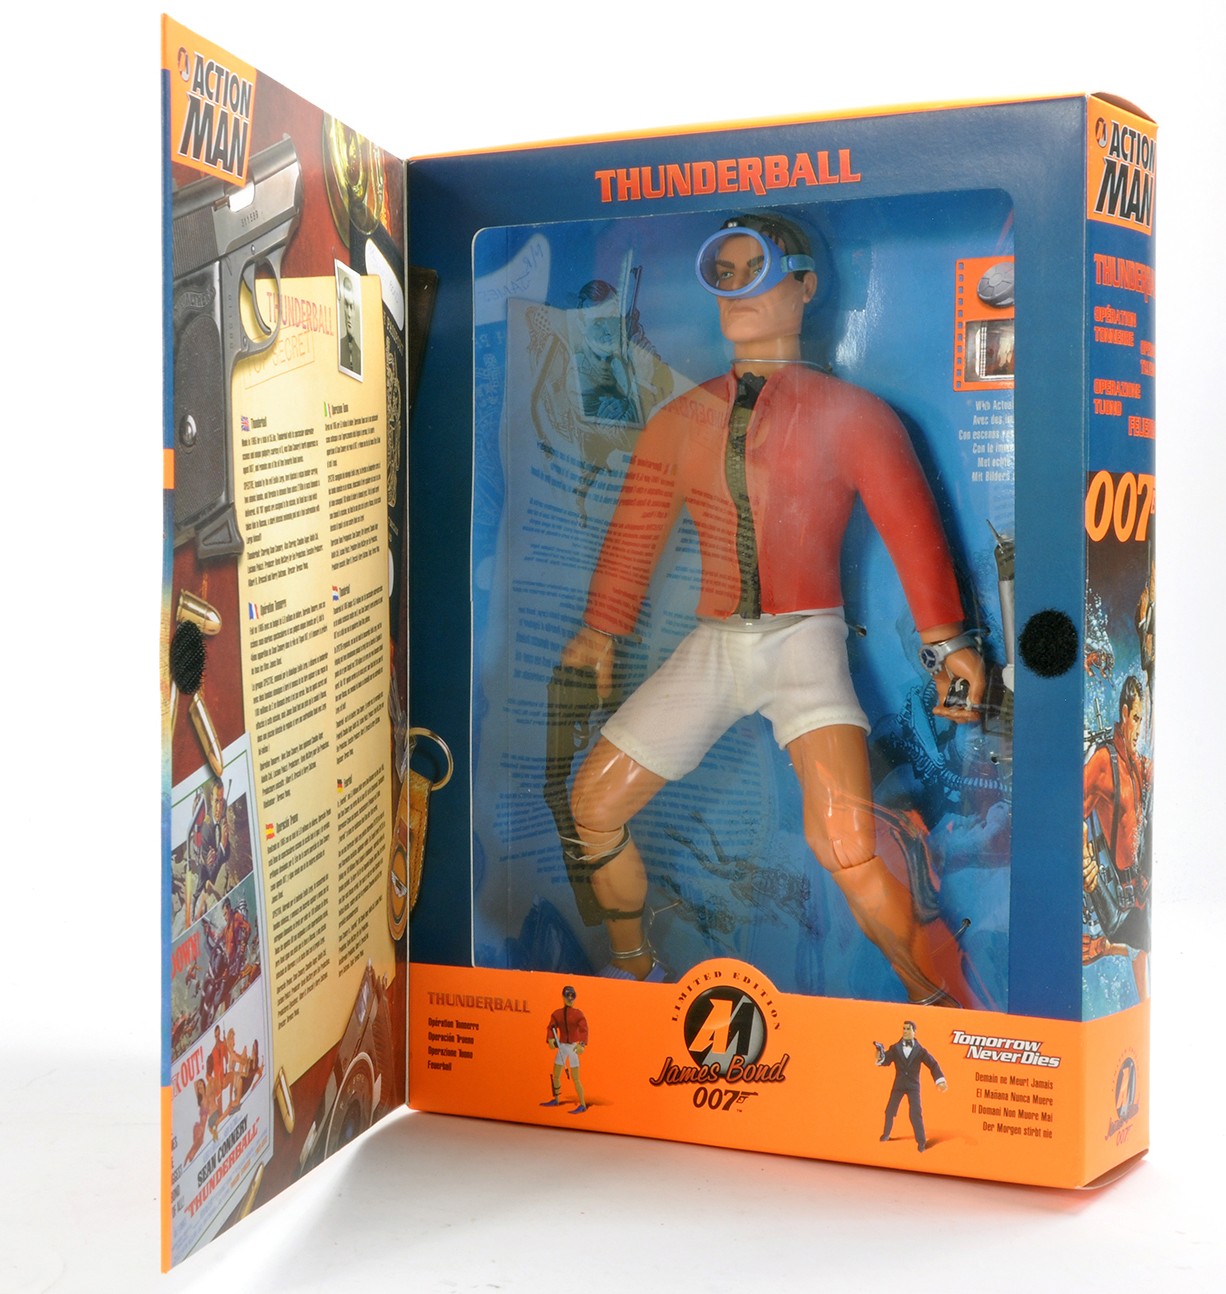 Action Man (Hasbro) comprising James Bond 007 Thunderball Limited Edition. Excellent, Unopened.